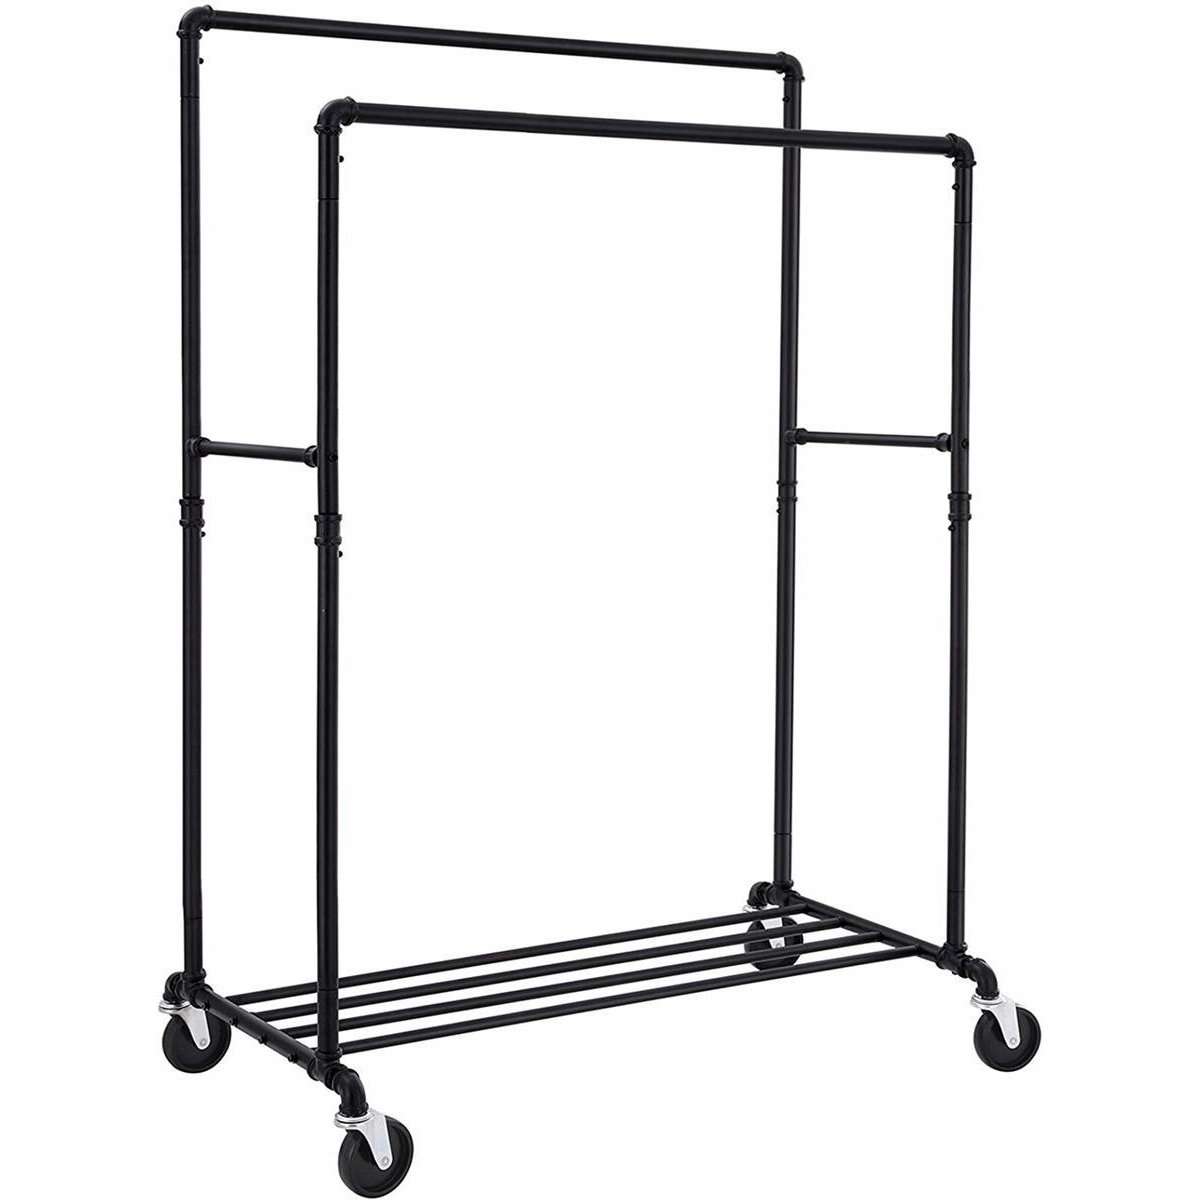 Nancy's Clothes Rack on Wheels - Double Bar Up to 110 kg - Rollable Wardrobe - Mobile Coat Rack - Clothes Racks